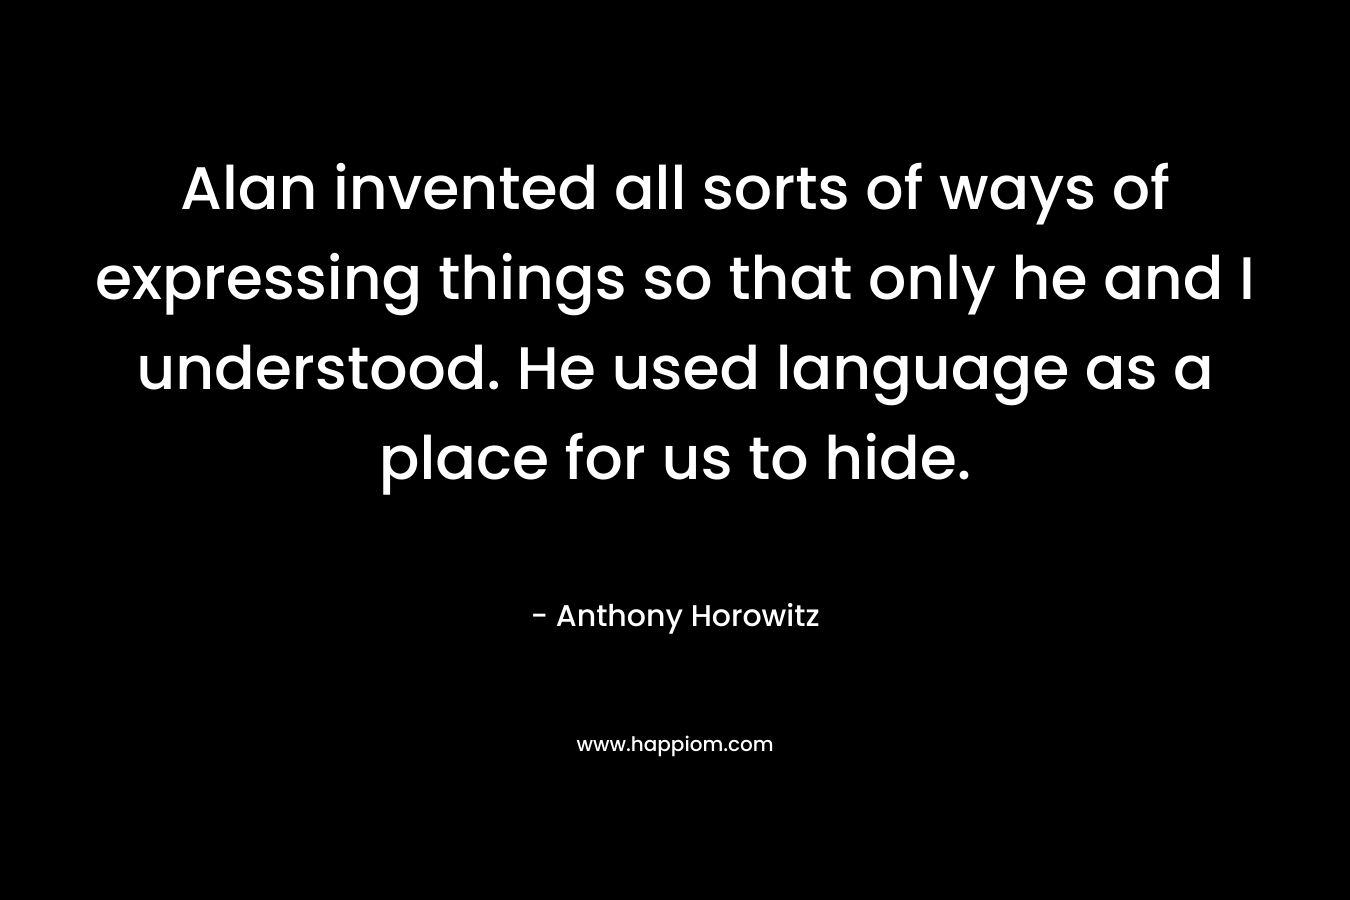 Alan invented all sorts of ways of expressing things so that only he and I understood. He used language as a place for us to hide. – Anthony Horowitz